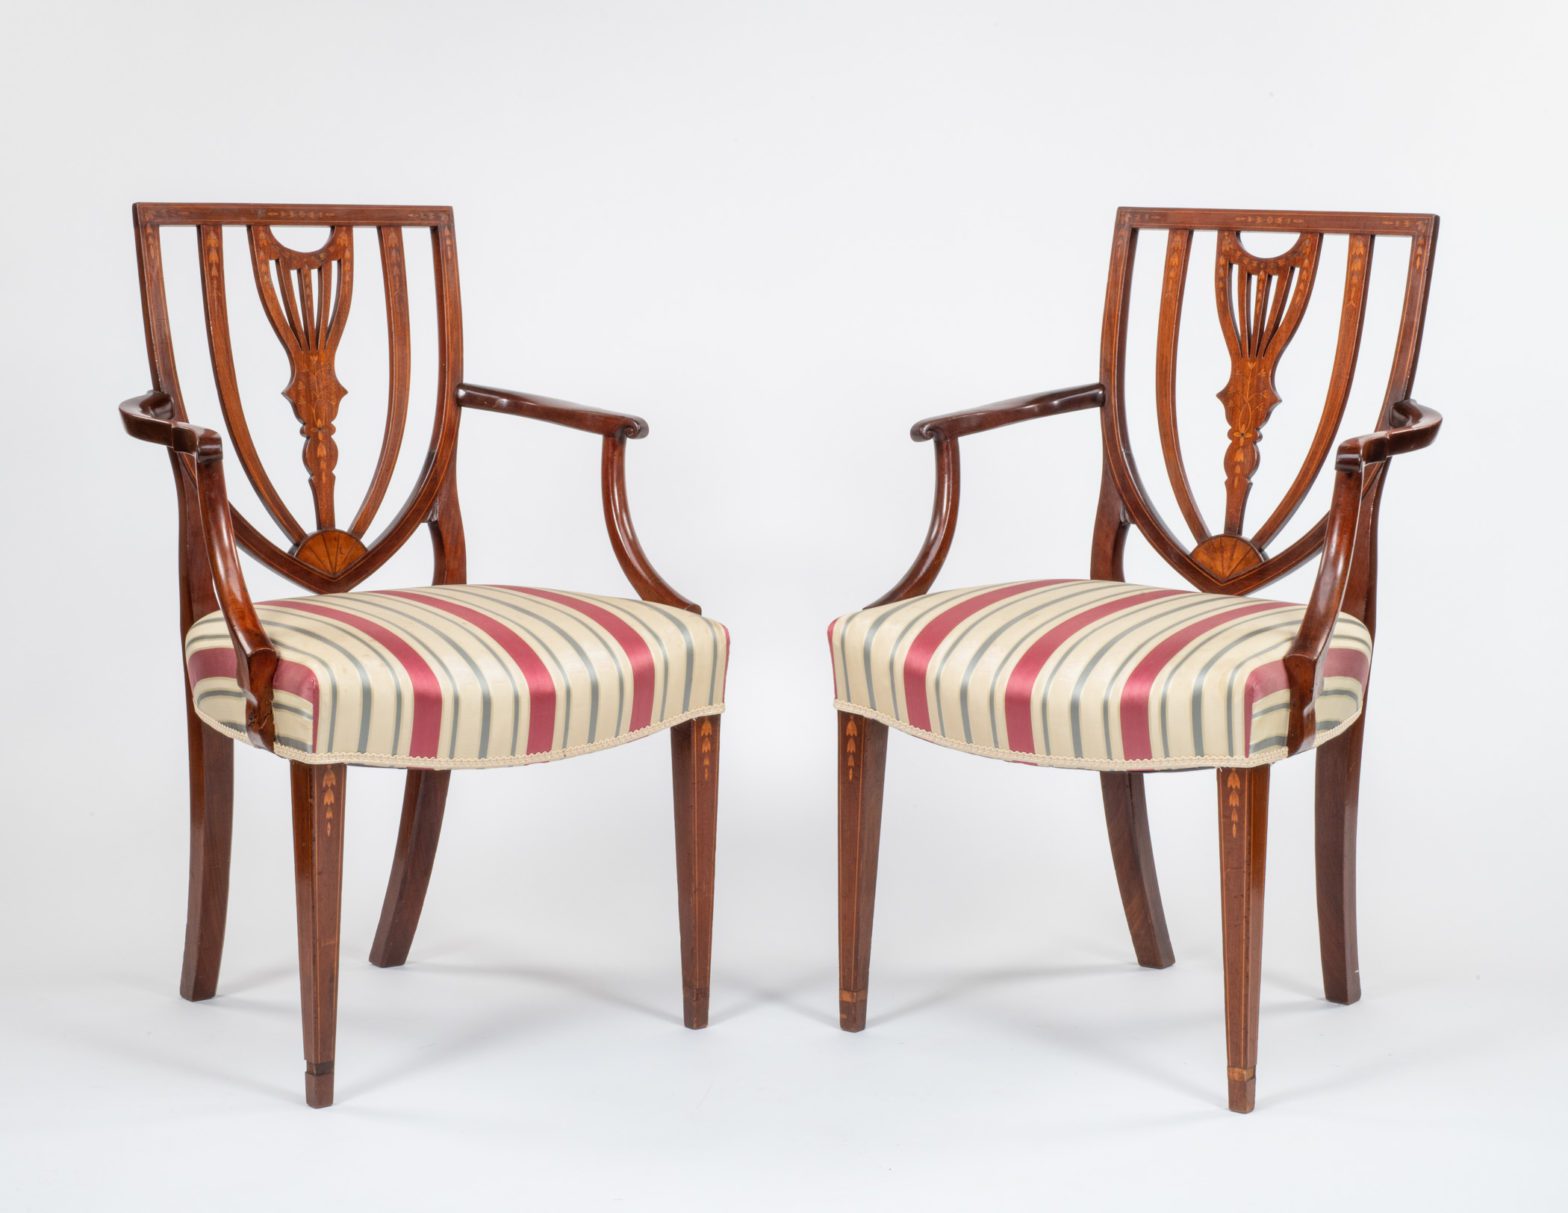 A pair of chairs made for Alexander Hamilton and his wife.